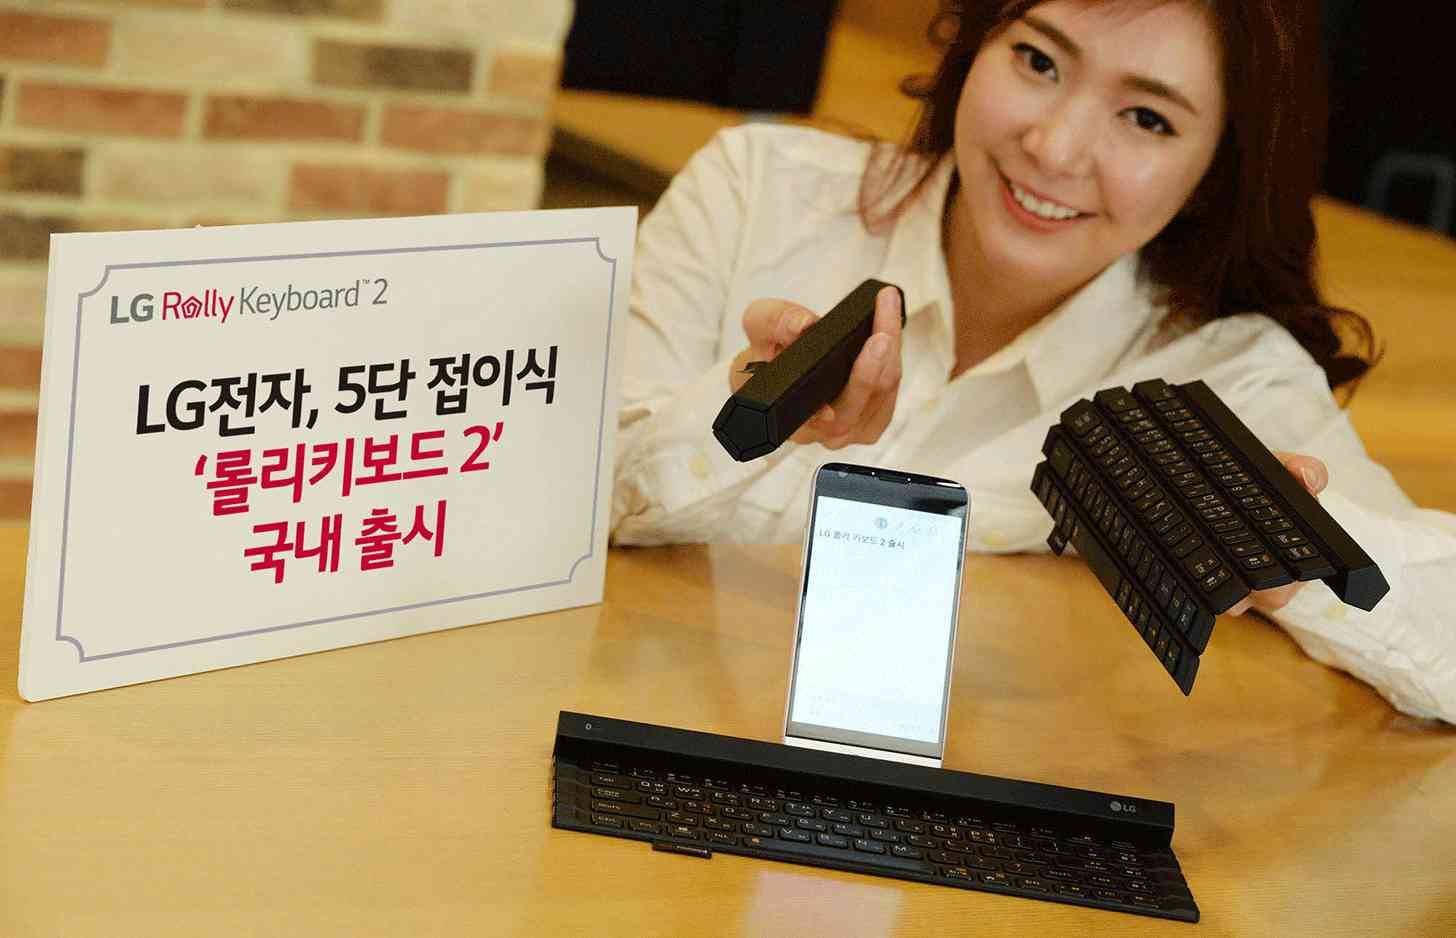 LG Rolly Keyboard 2 official